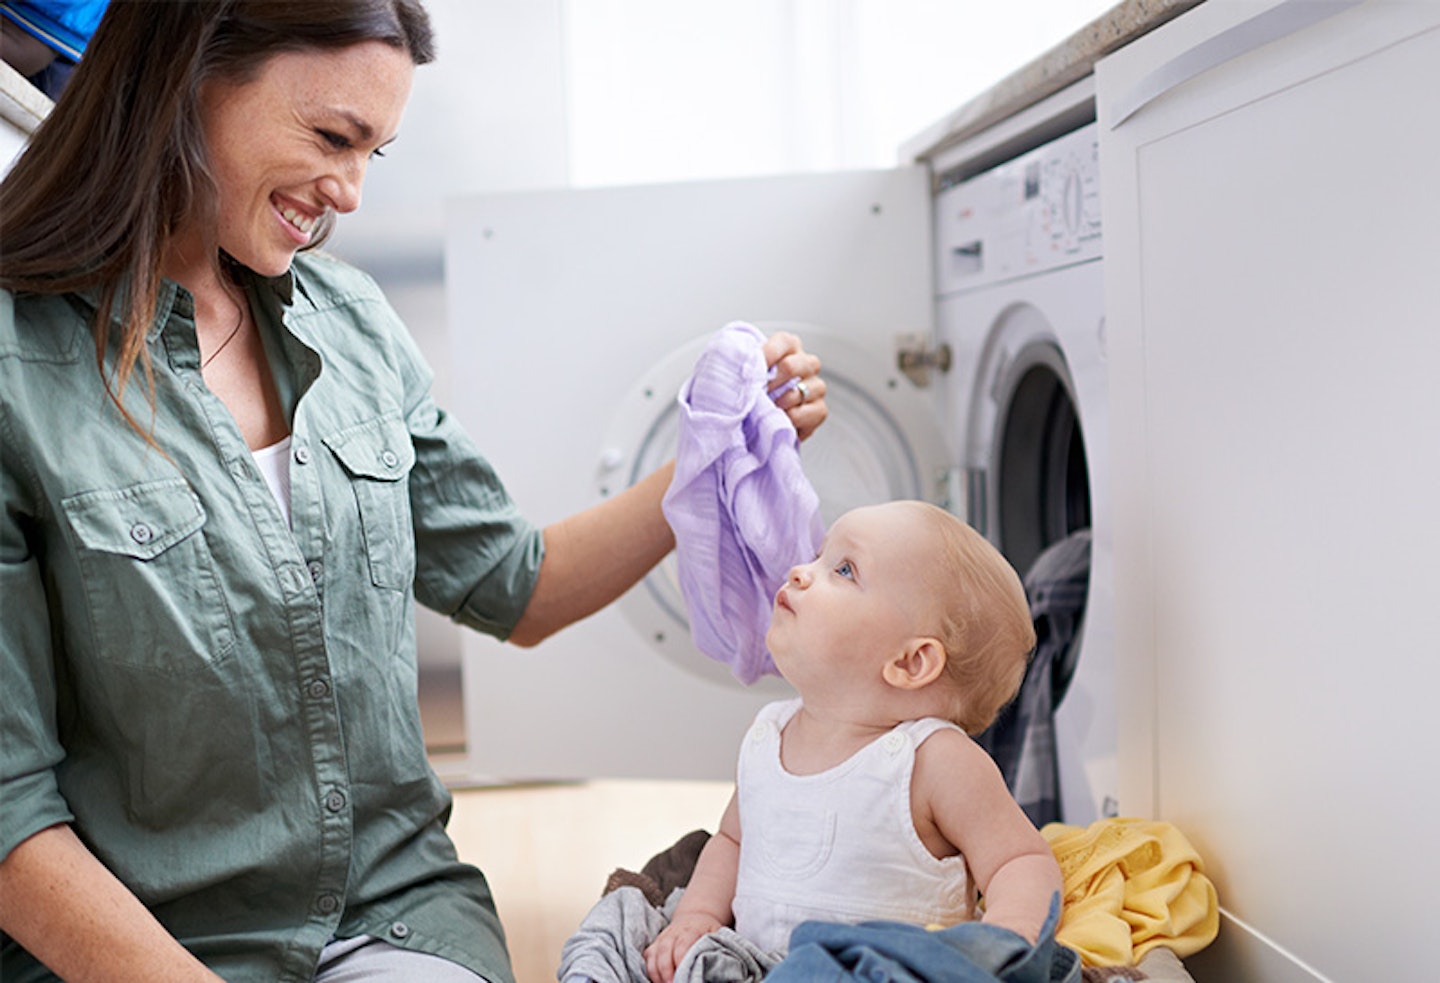 https://images.bauerhosting.com/affiliates/sites/12/motherandbaby/legacy/root/washing-baby-clothes.jpg?ar=16%3A9&fit=crop&crop=top&auto=format&w=1440&q=80